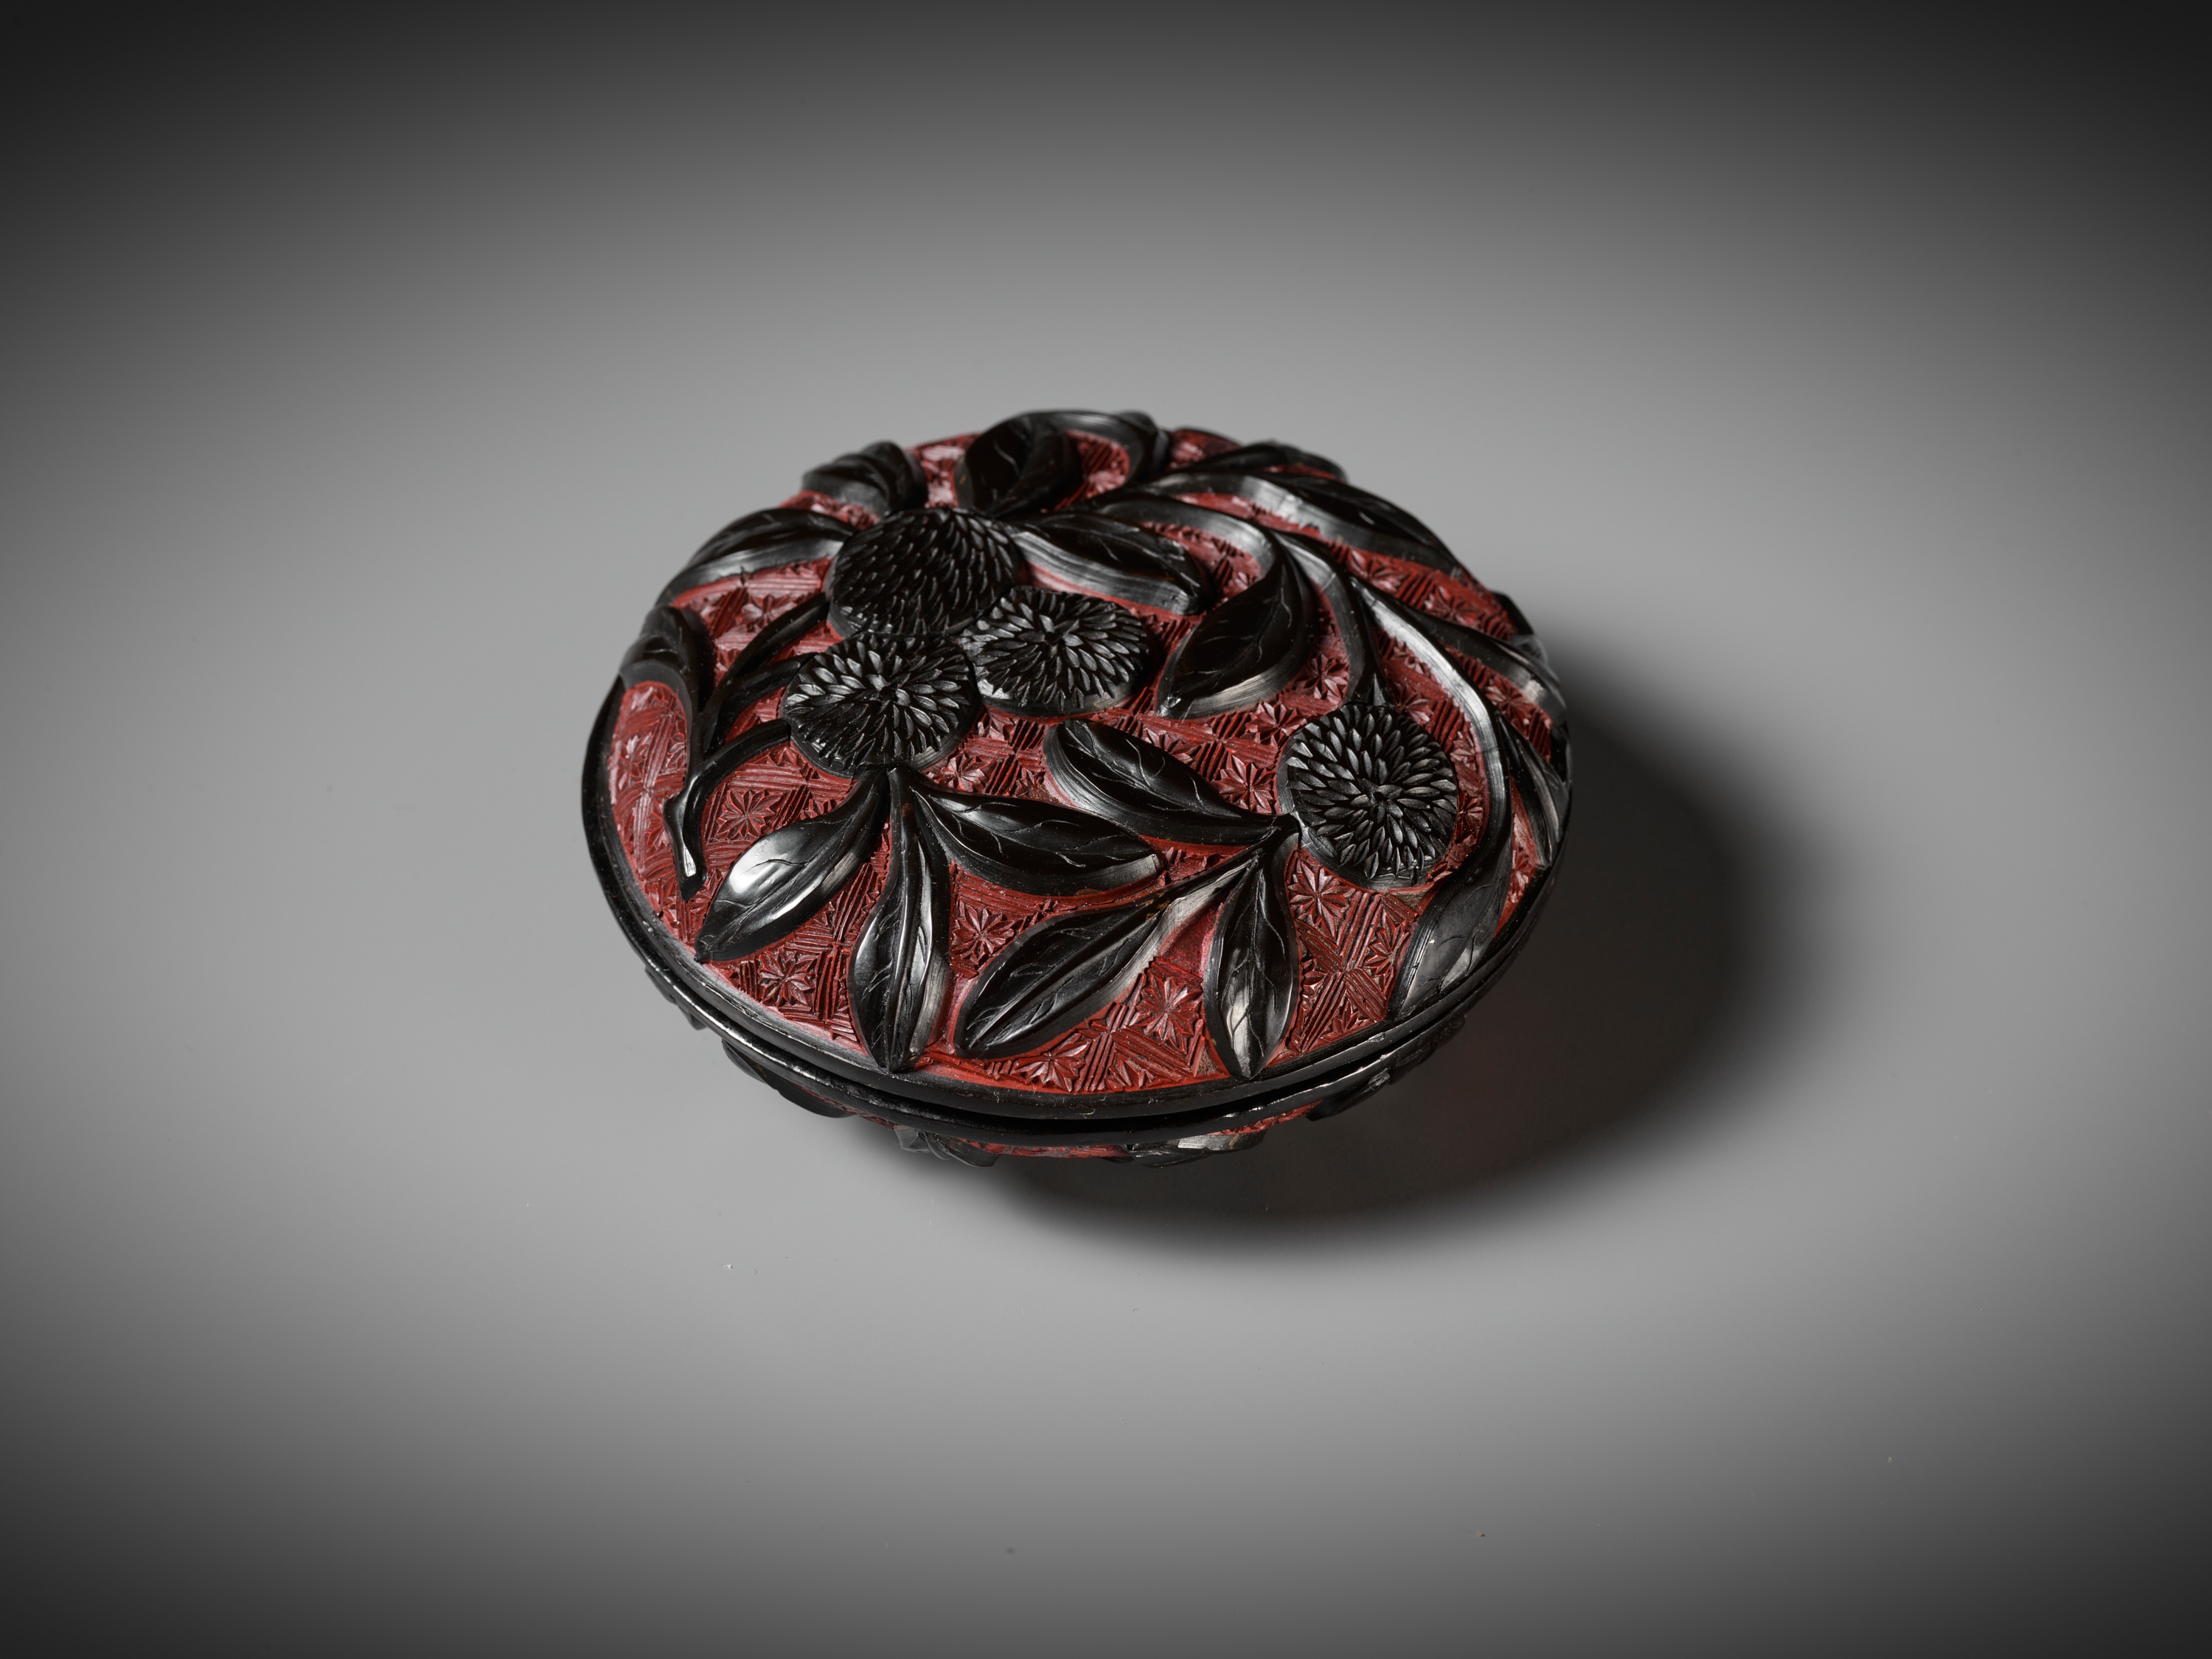 A PAIR OF RED AND BLACK LACQUER 'LYCHEE' BOXES AND COVERS, MING DYNASTY - Image 11 of 11